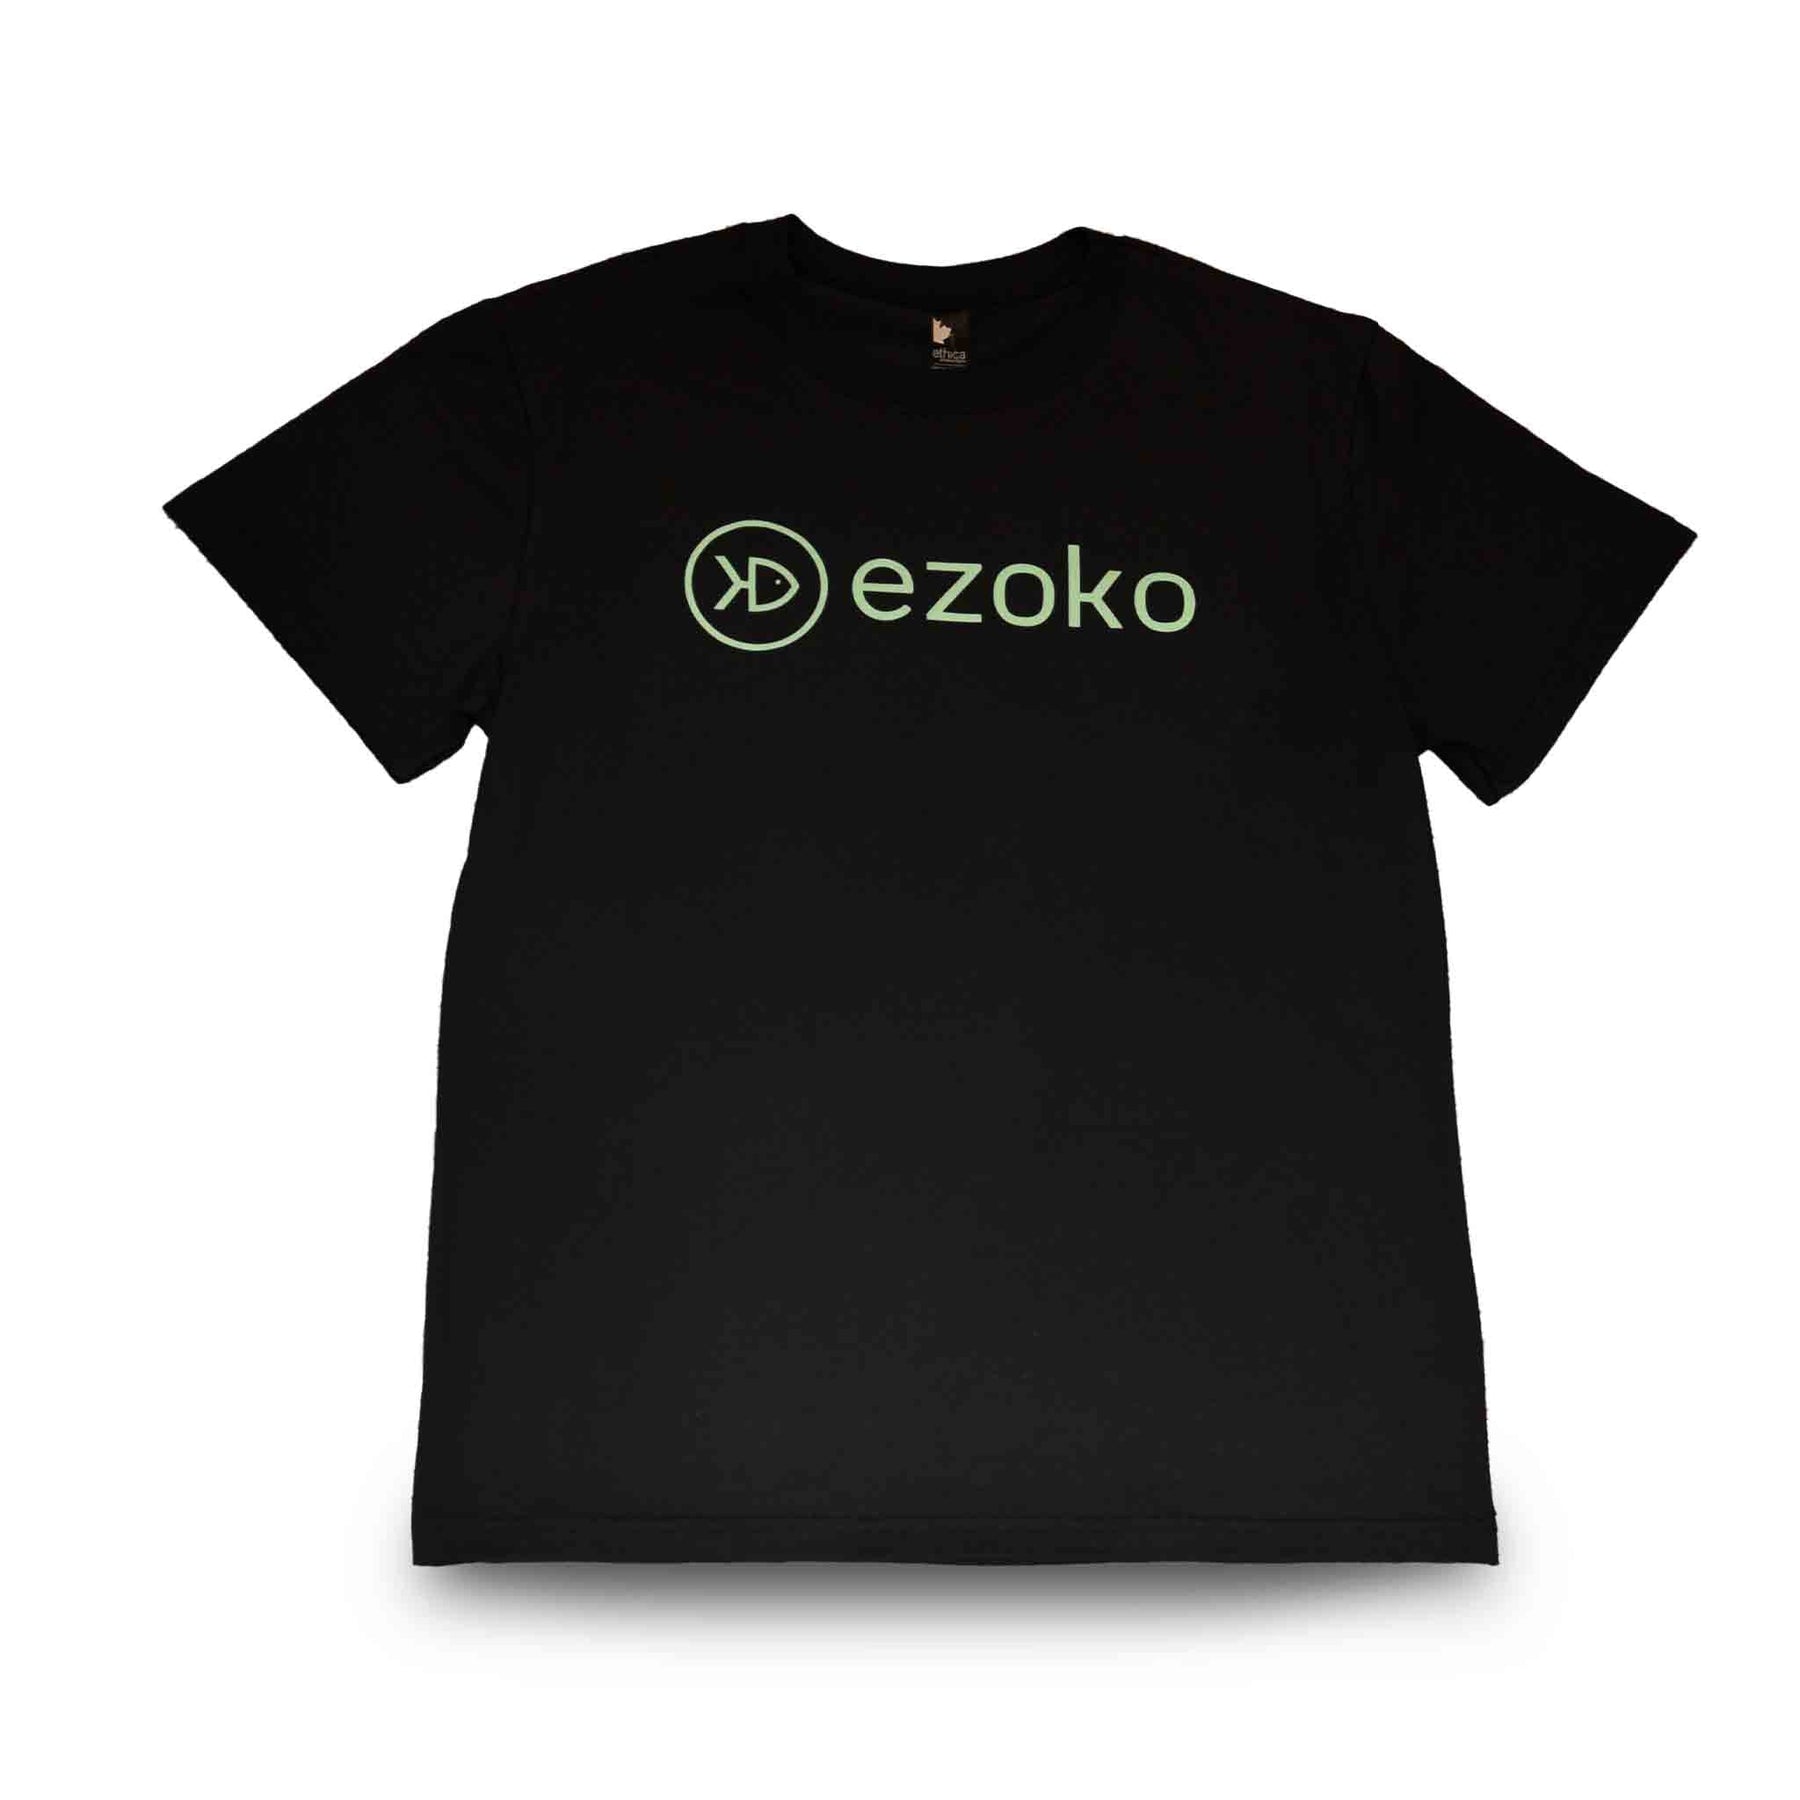 Front view of the black EZOKO t-shirts with green Ezoko logo on the chest